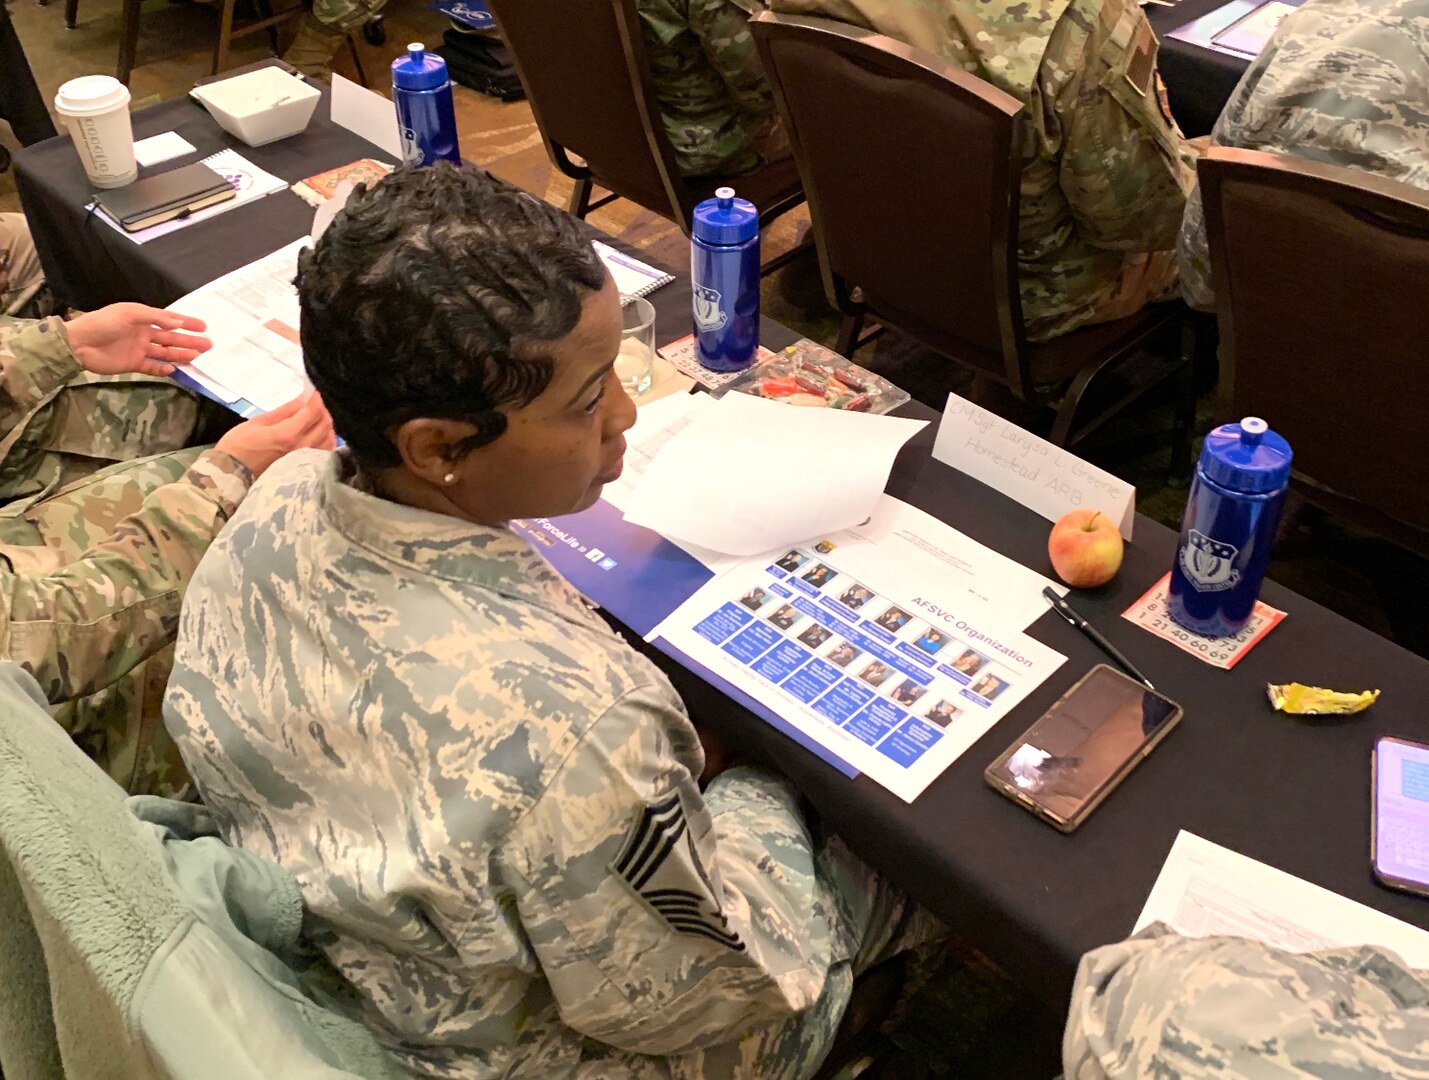 More than 220 force support officer and enlisted leaders gathered in Texas Nov. 18-22 at the 2019 FSS Leadership Training Workshop to help tackle big rock items impacting Airmen and families, and plan for future programs.